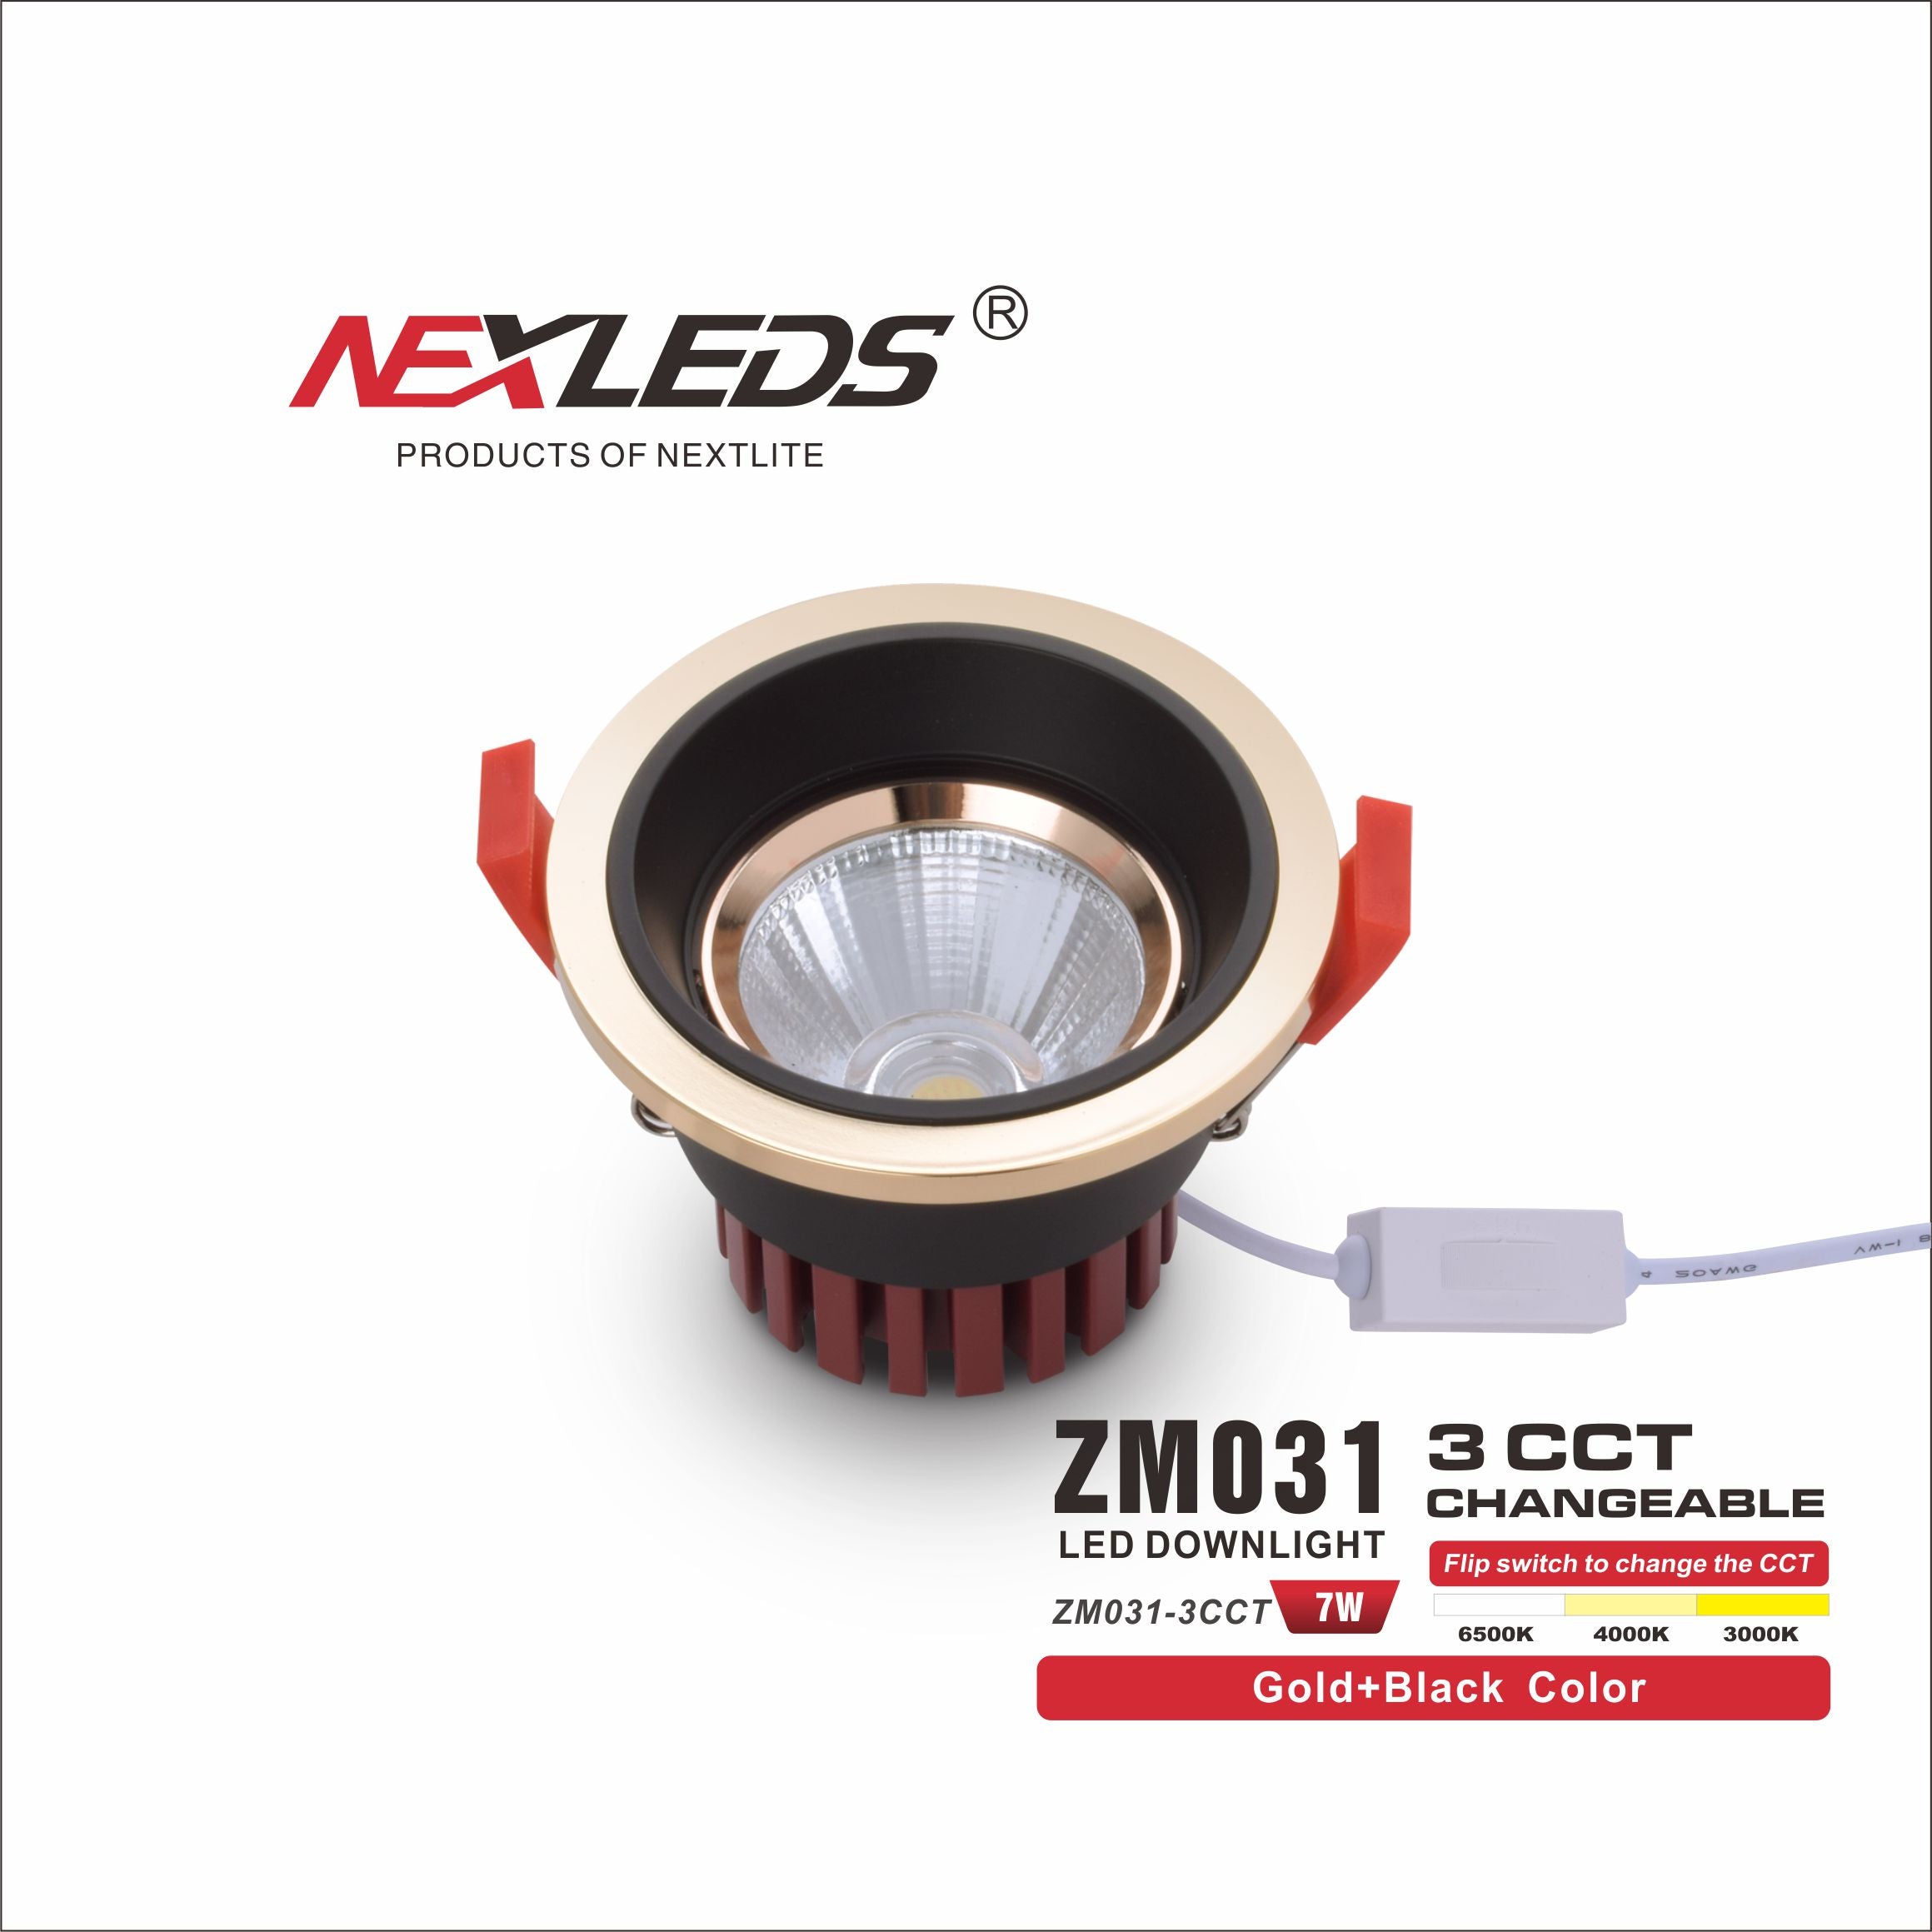 ZM031-3CCT 7W CHANGEABLE LED Downlight